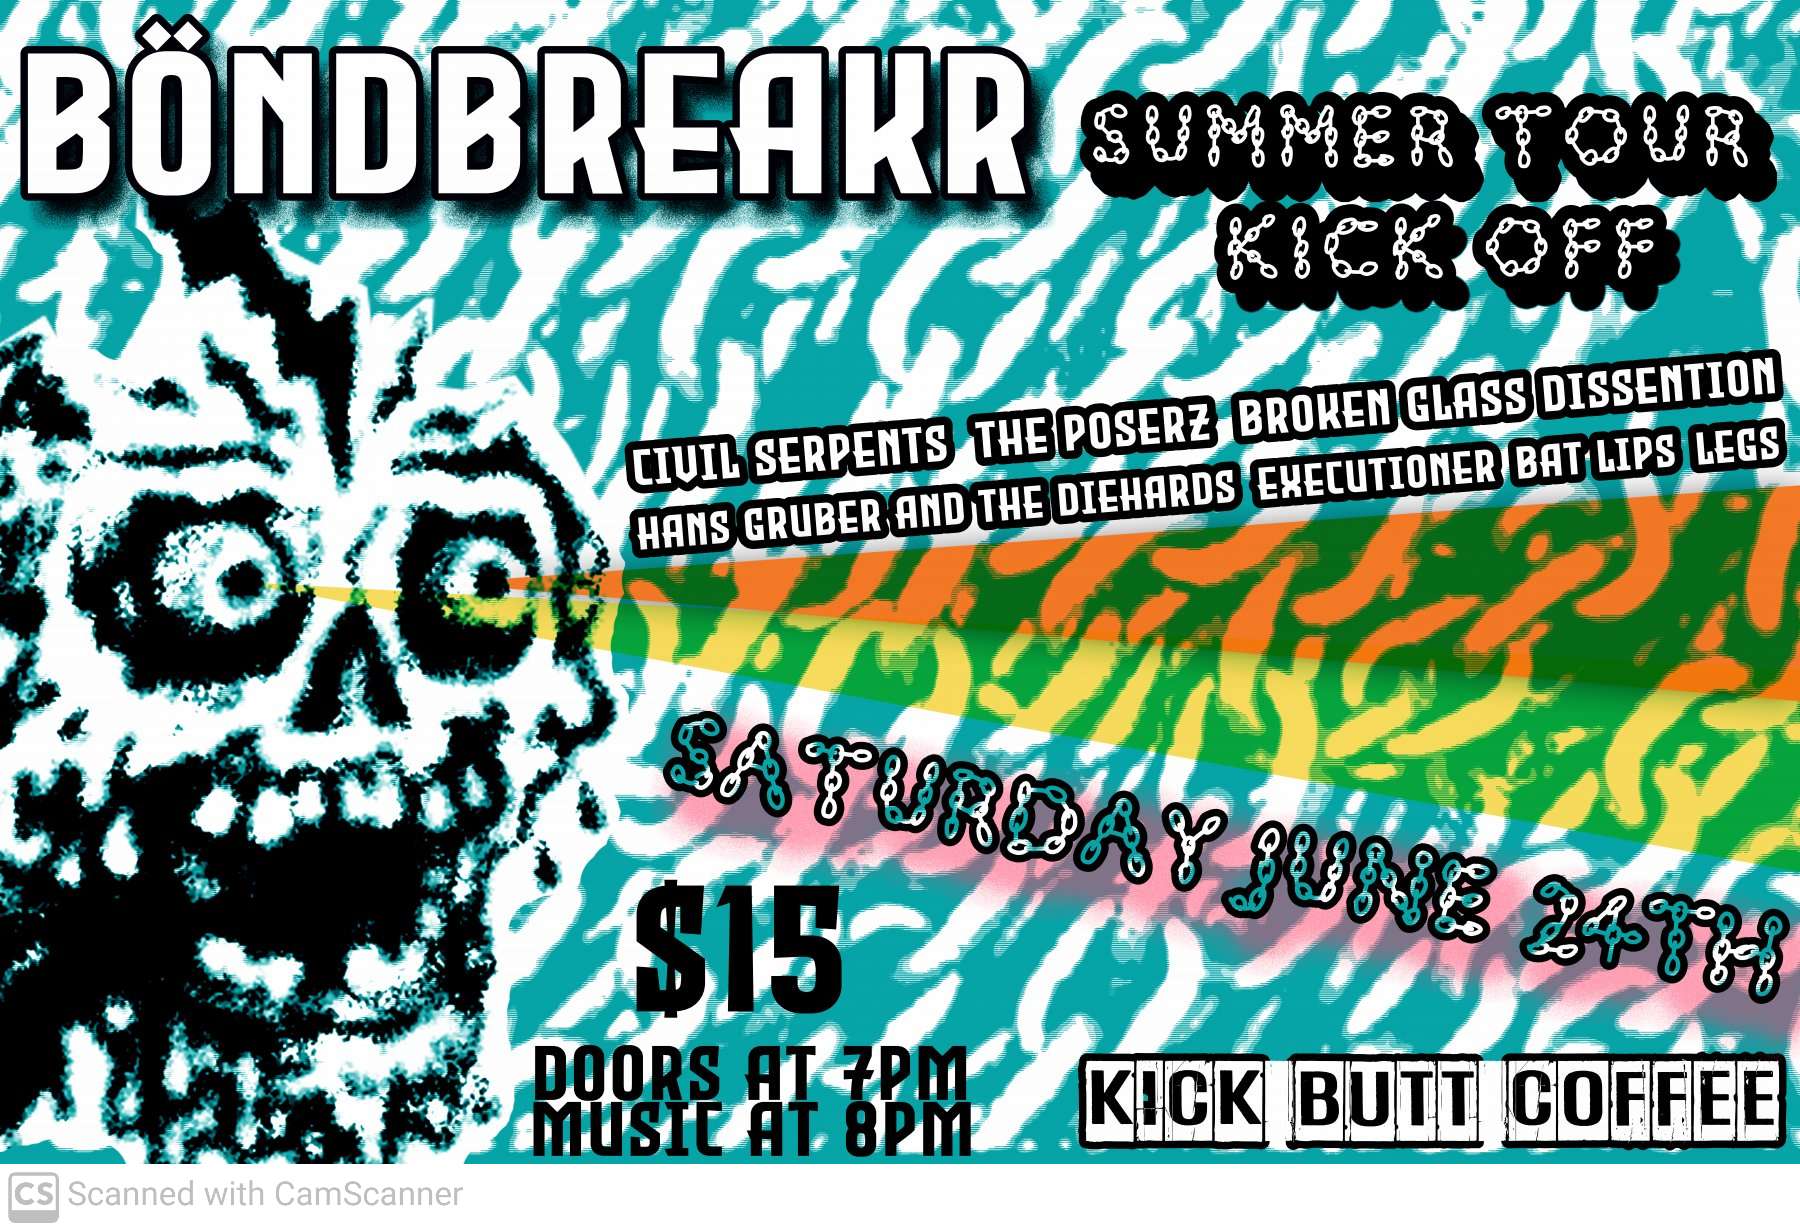 Bondbreakr Summer Tour Kick Off w/ Hans Gruber and the Die Hards, Civil Serpents, AND MORE